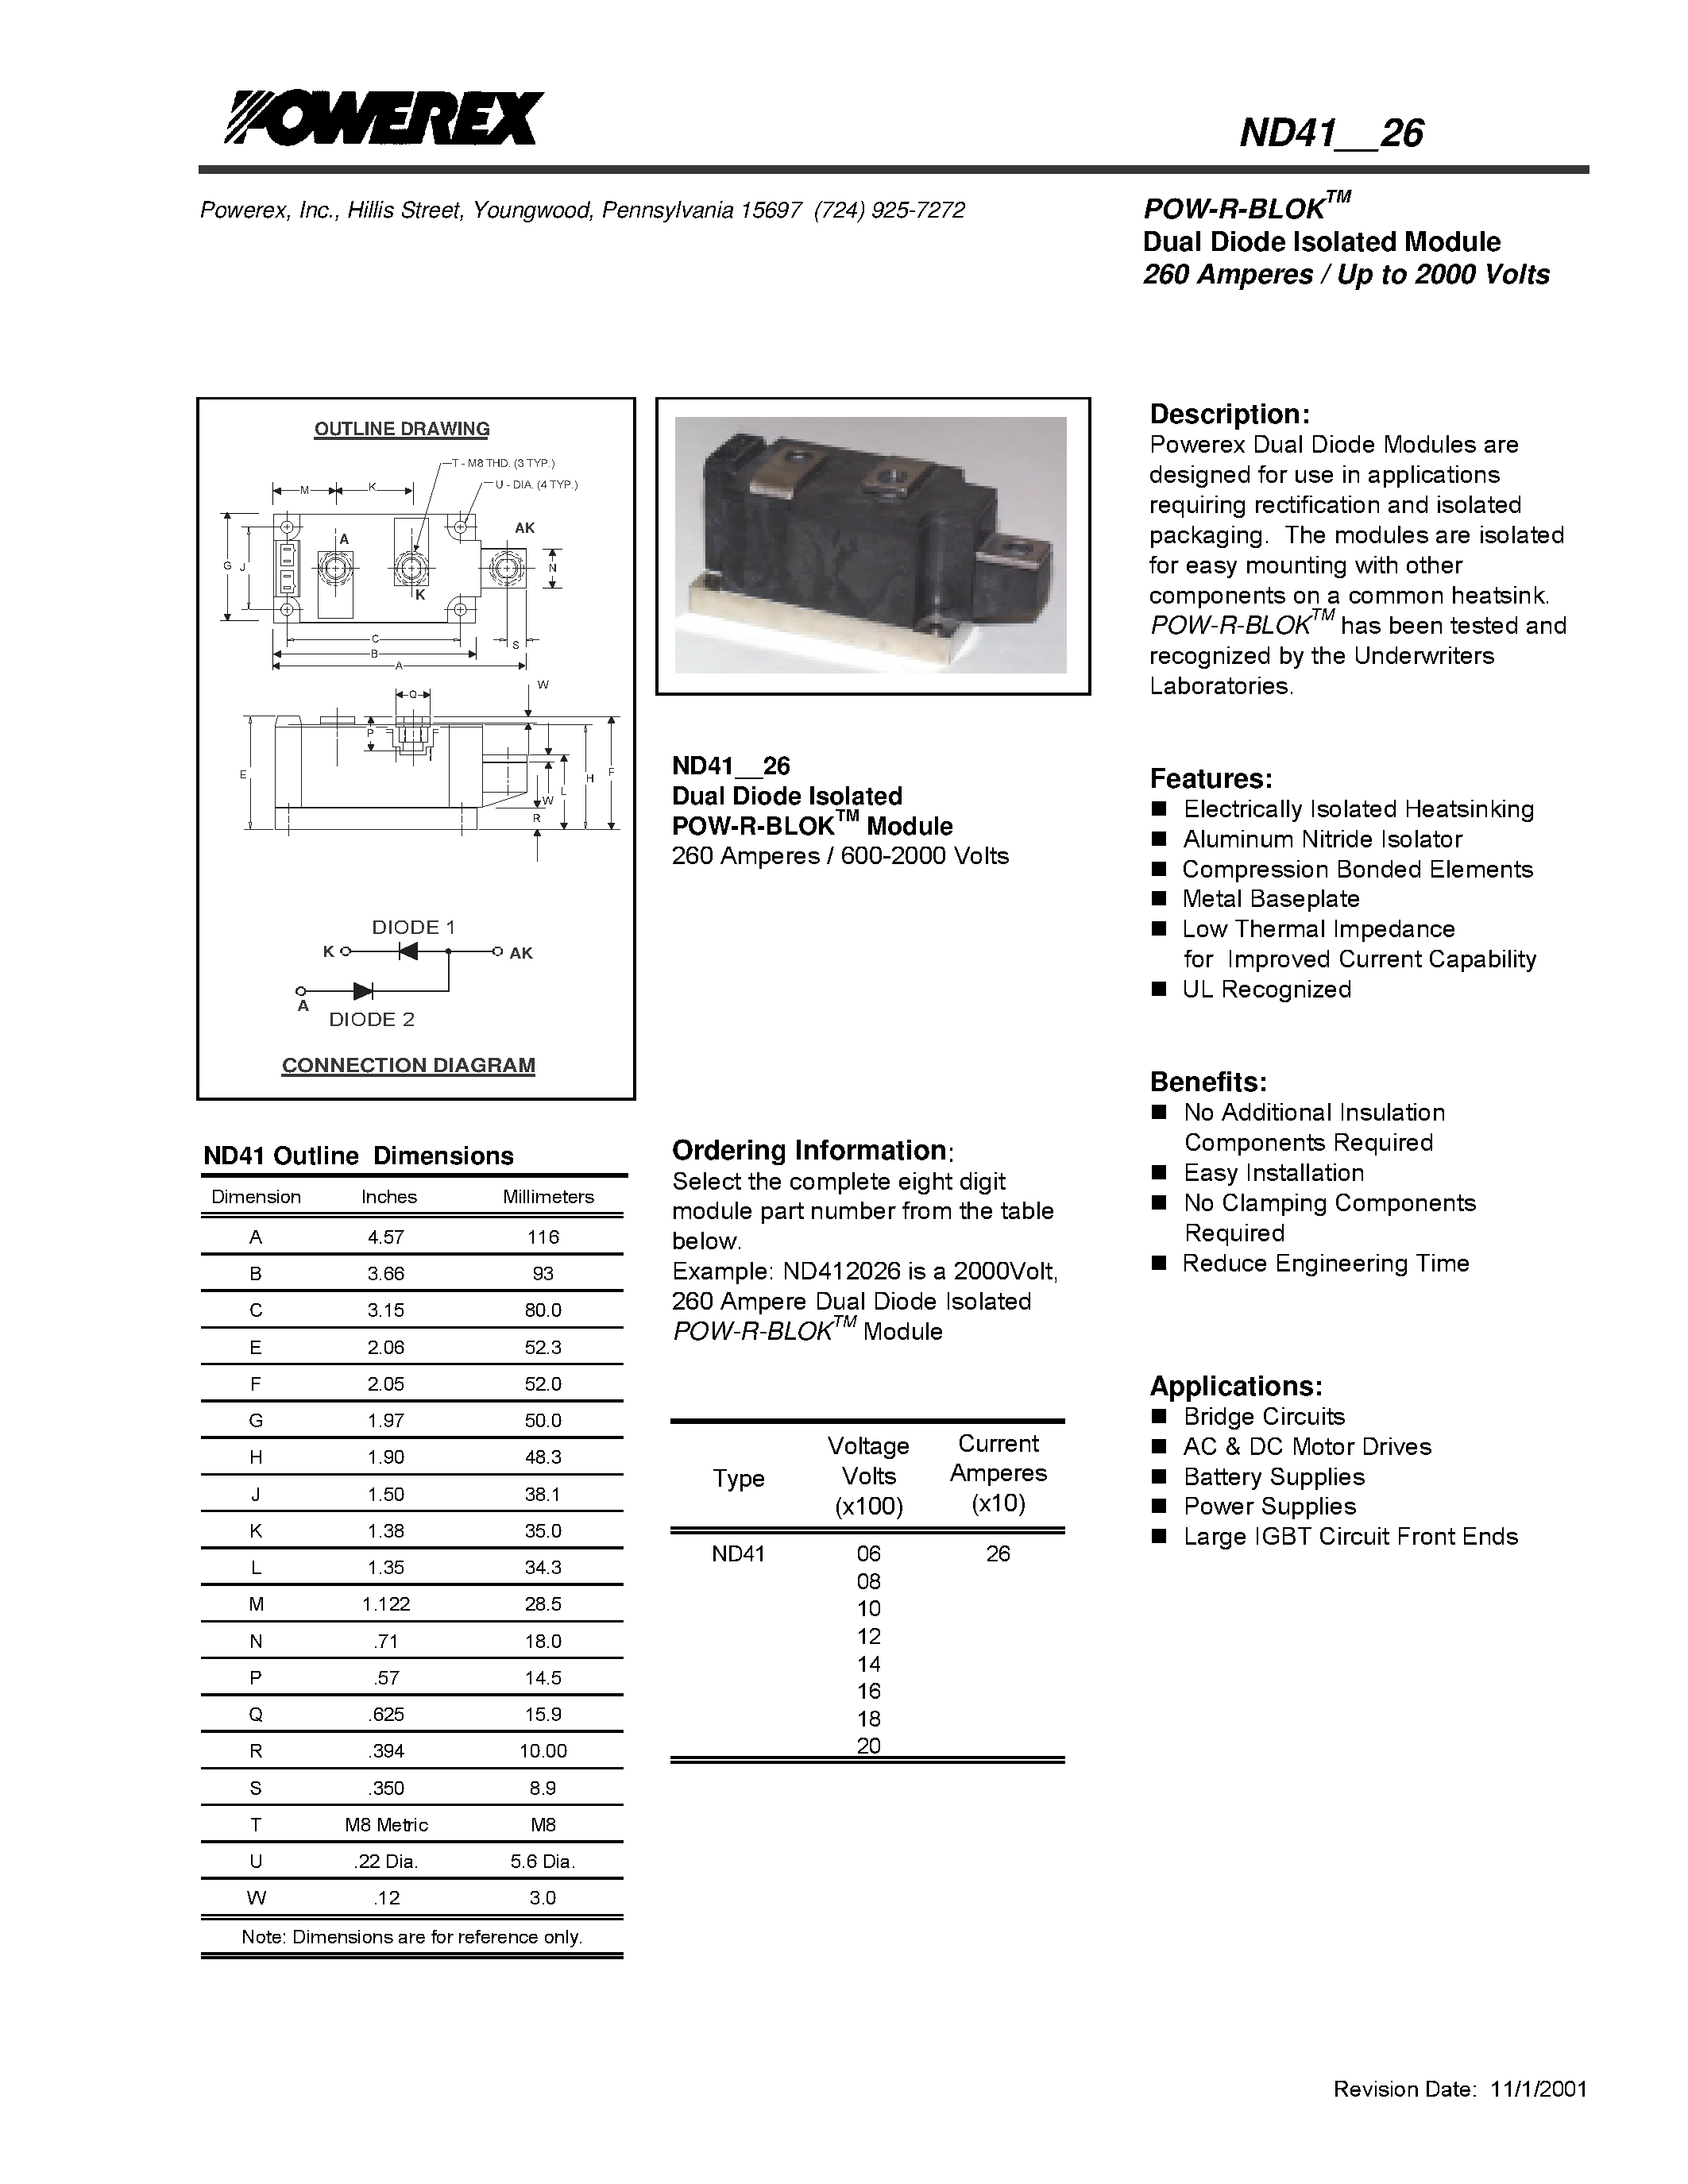 Datasheet ND411426 - POW-R-BLOK Dual Diode Isolated Module (260 Amperes / Up to 2000 Volts) page 1